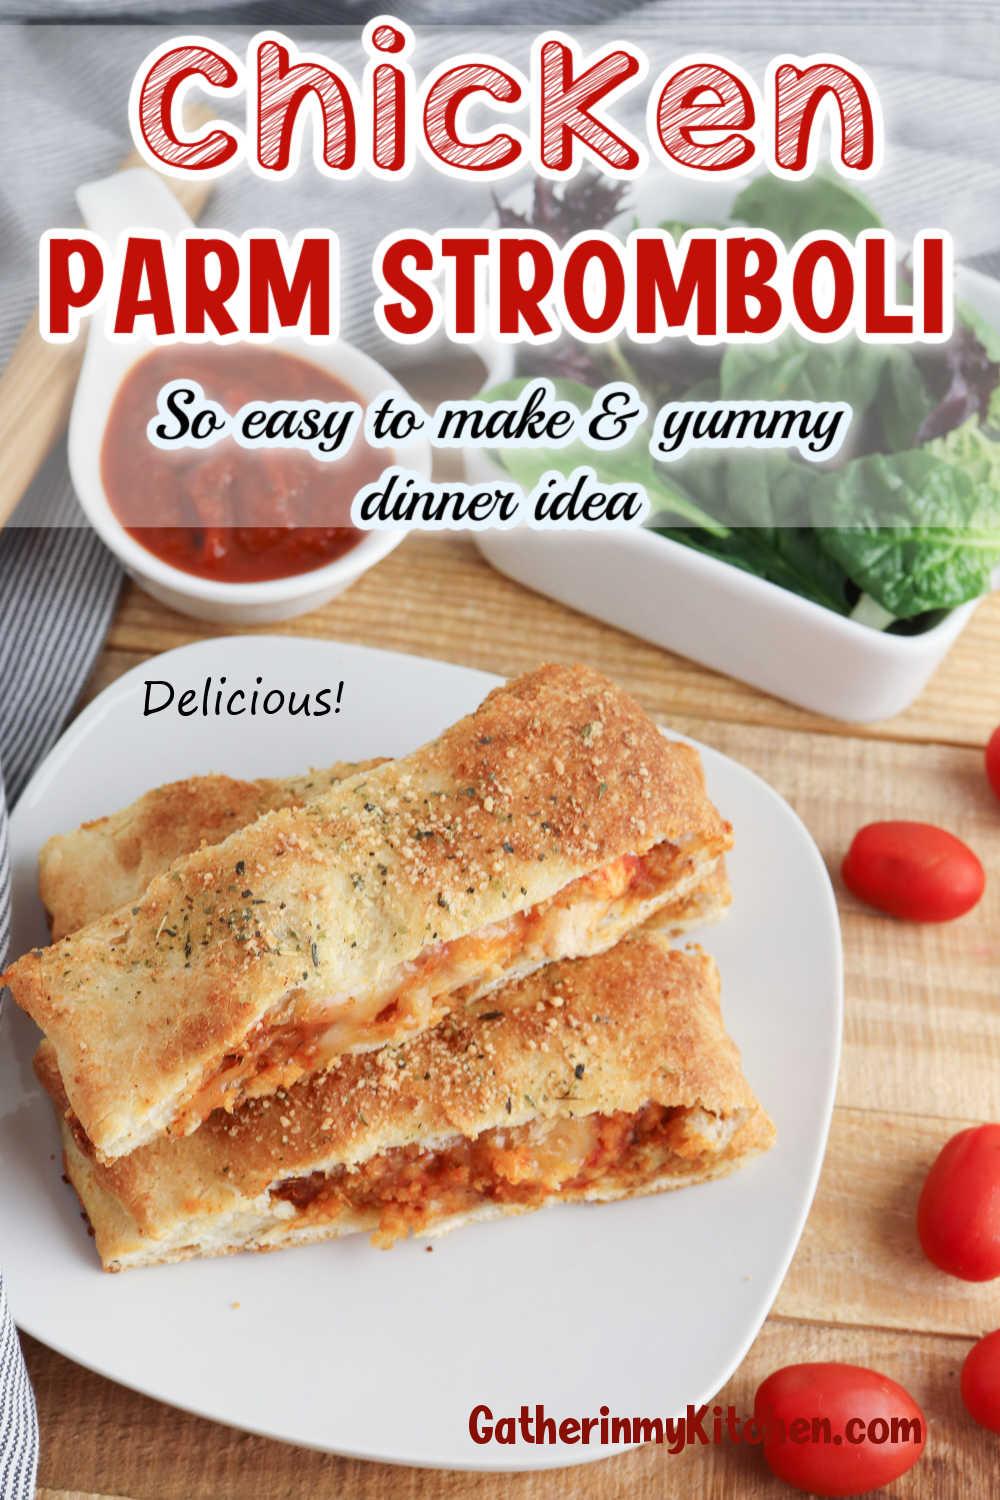 Pin image: top says "chicken parm stromboli: so easy to make & yummy dinner idea" with a pic of parm chicken stromboli stacked on a plate.